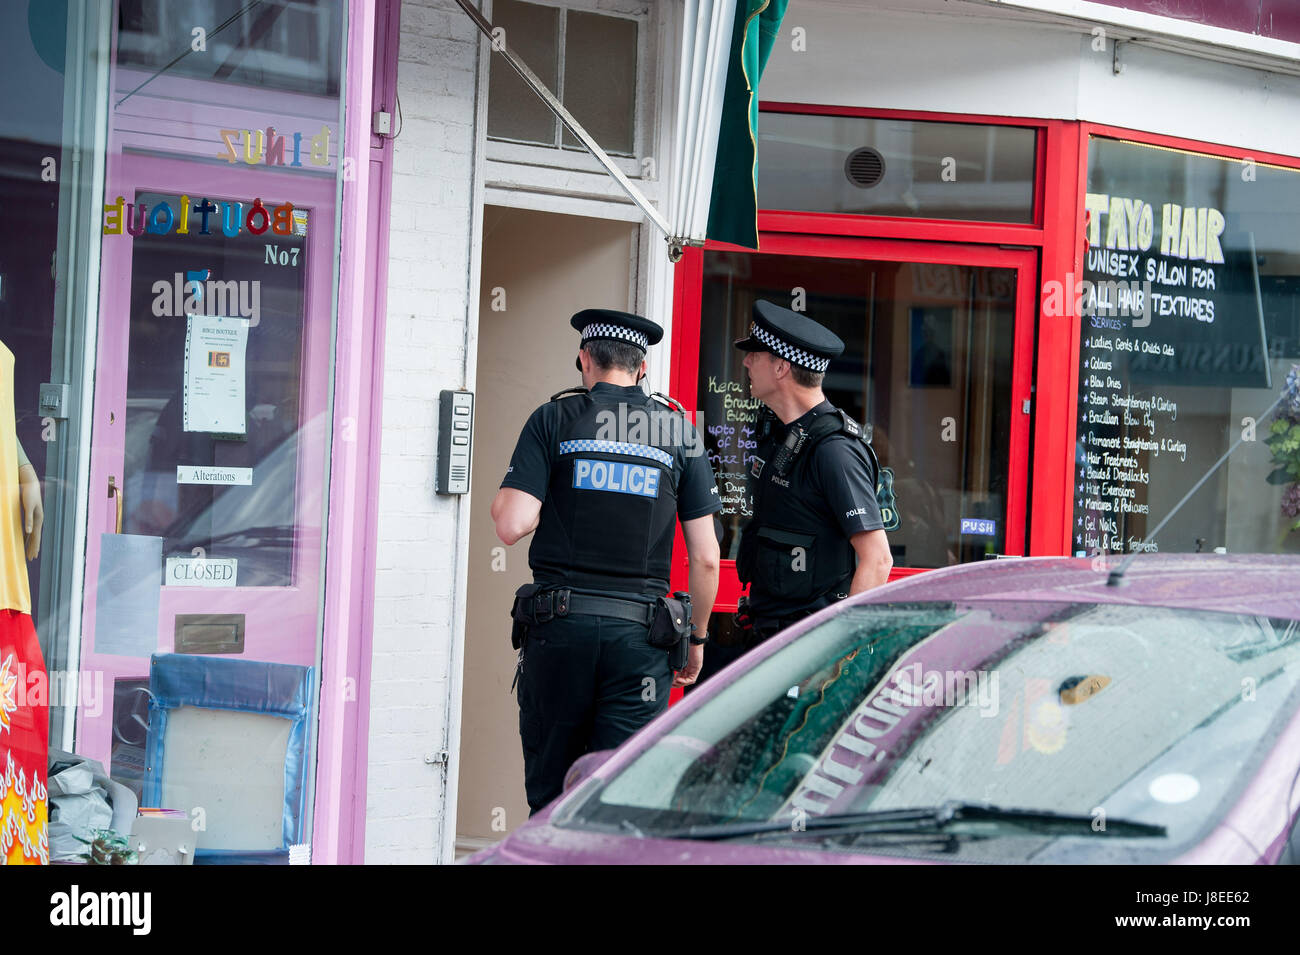 Shoreham by Sea, Sussex, UK. 29th May, 2017. Scenes in Shoreham by Sea, Sussex, UK believed to be the location of where an arrest has been made in connection to the terrorist attacks in Manchester. The address continues to be searched. Credit: Darren Cool/Alamy Live News Stock Photo